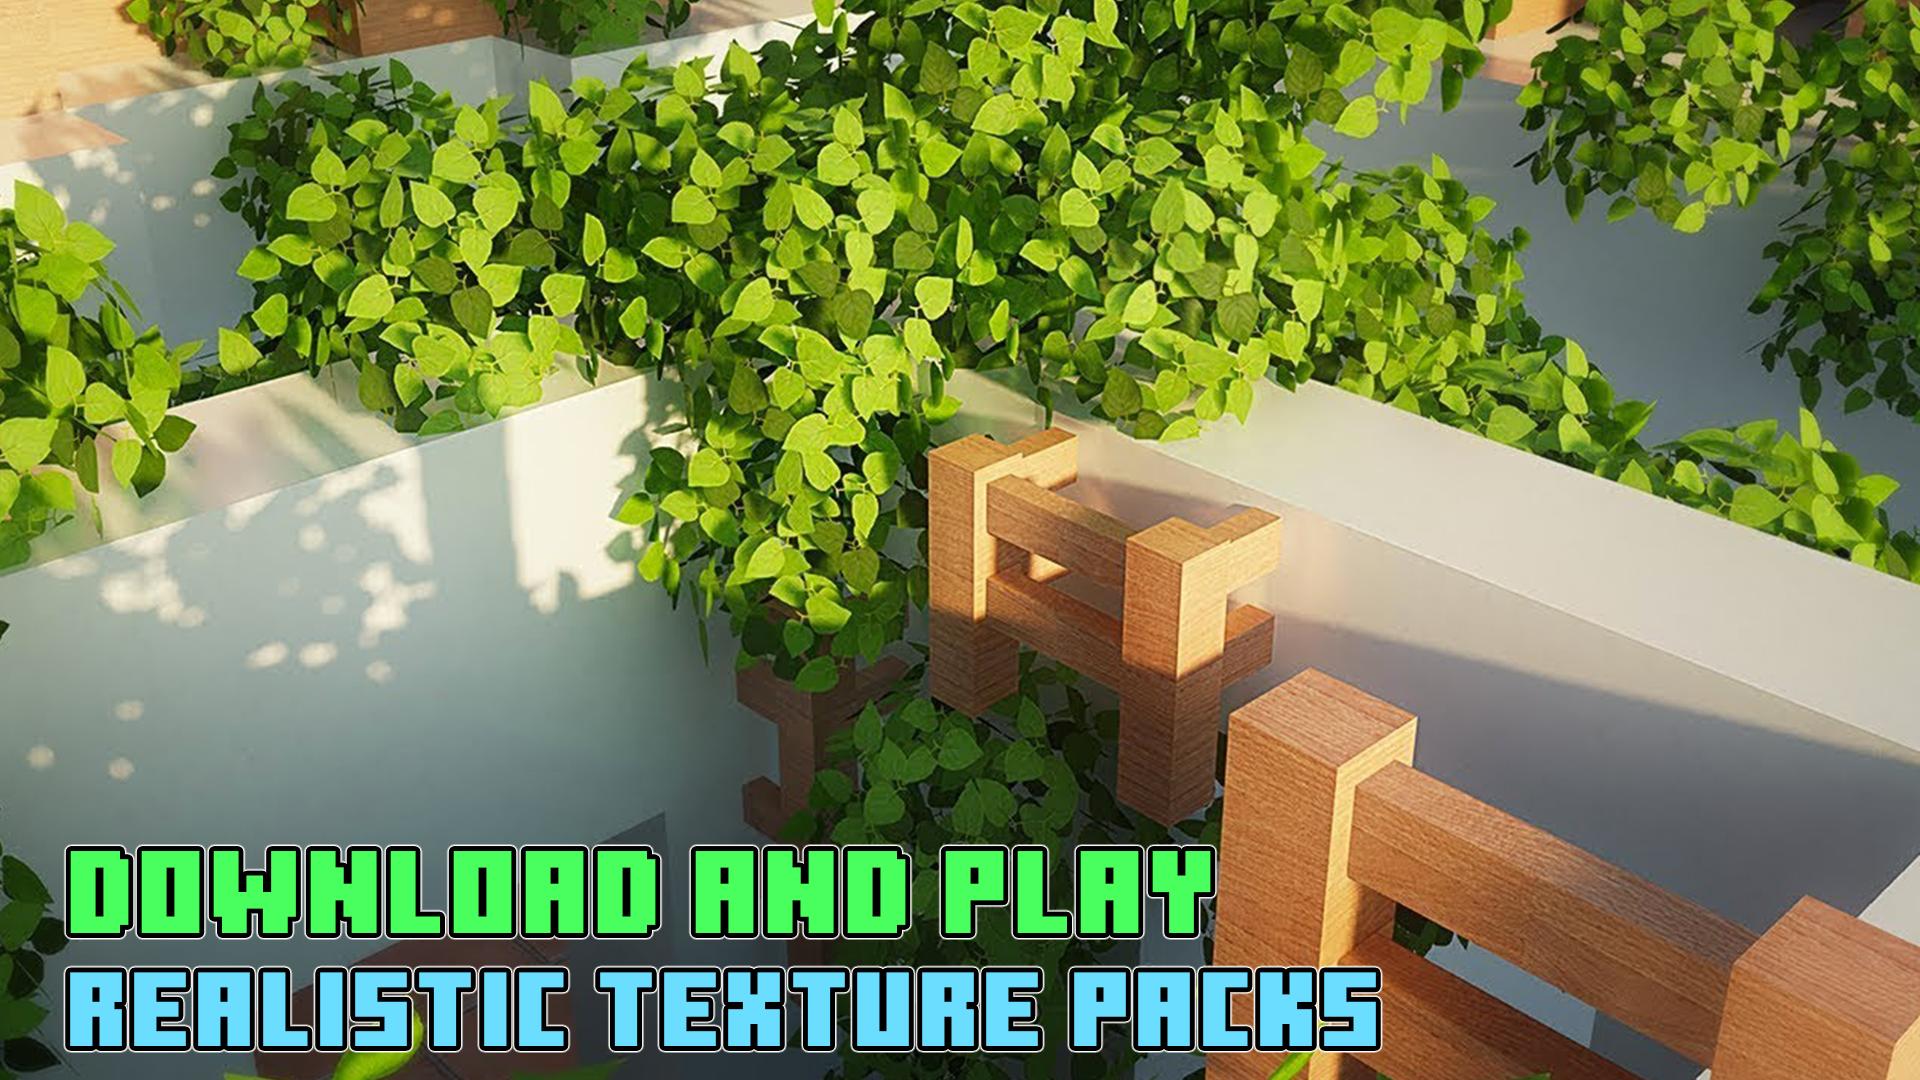 Realistic Texture Pack - Natural Shaders for Android - APK Download